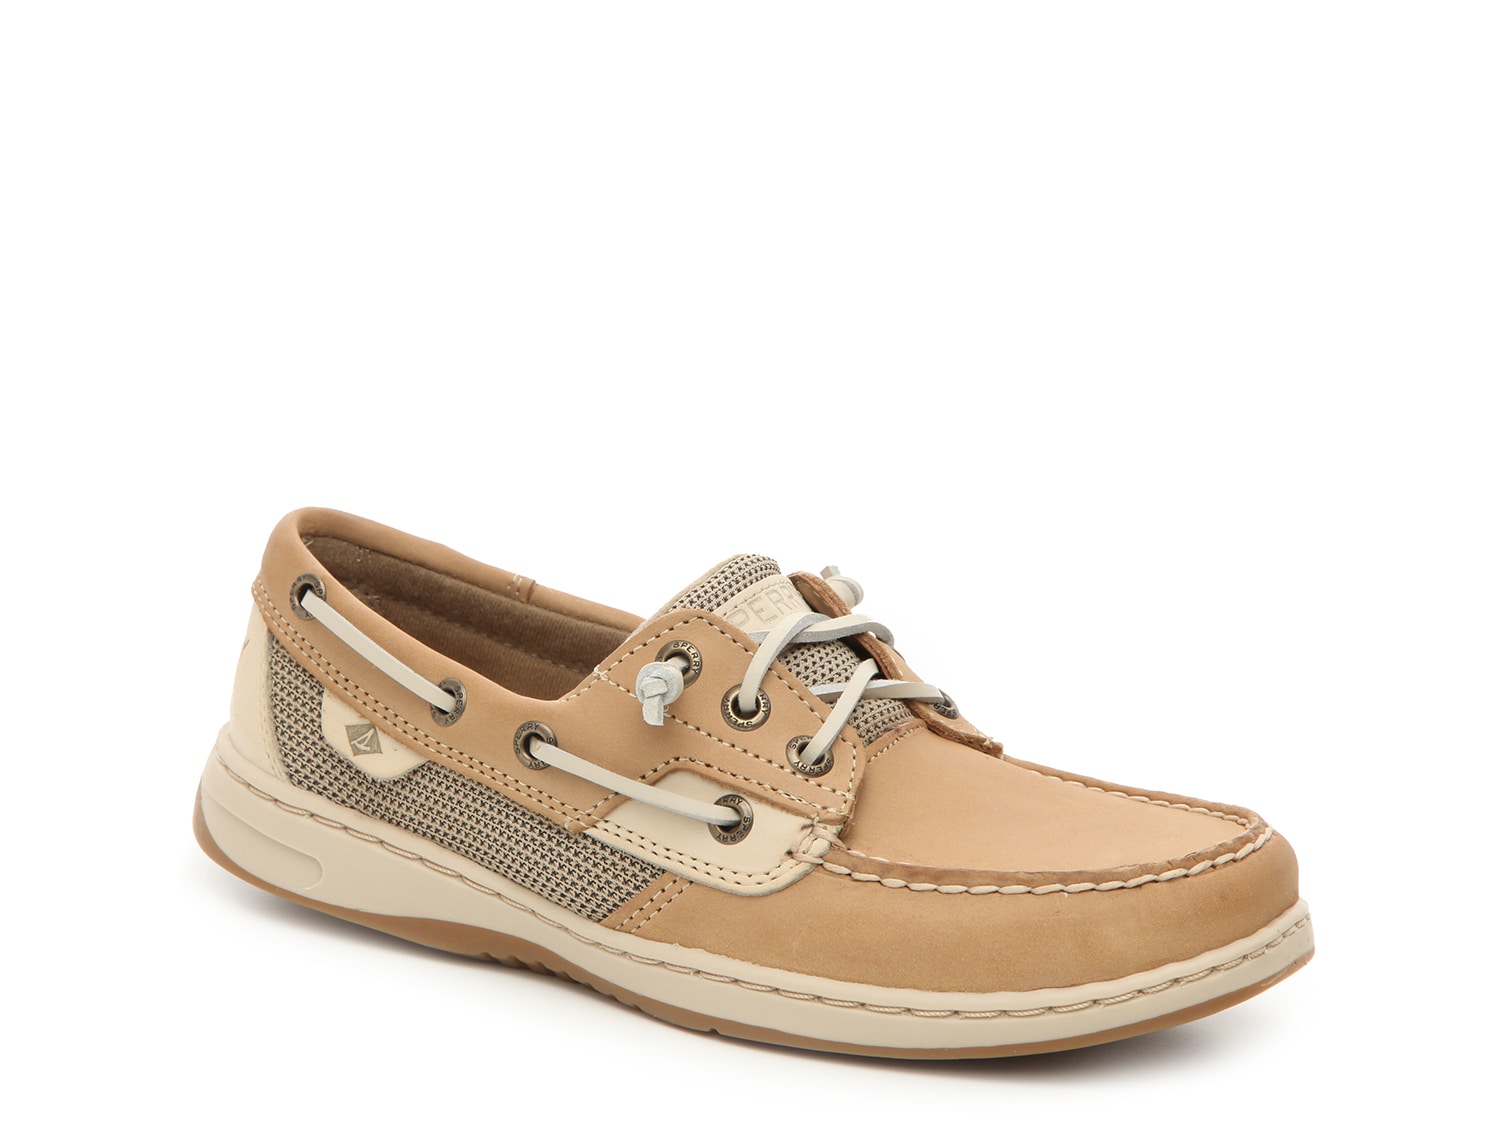 Sperry Rosefish Boat Shoe - Free Shipping | DSW